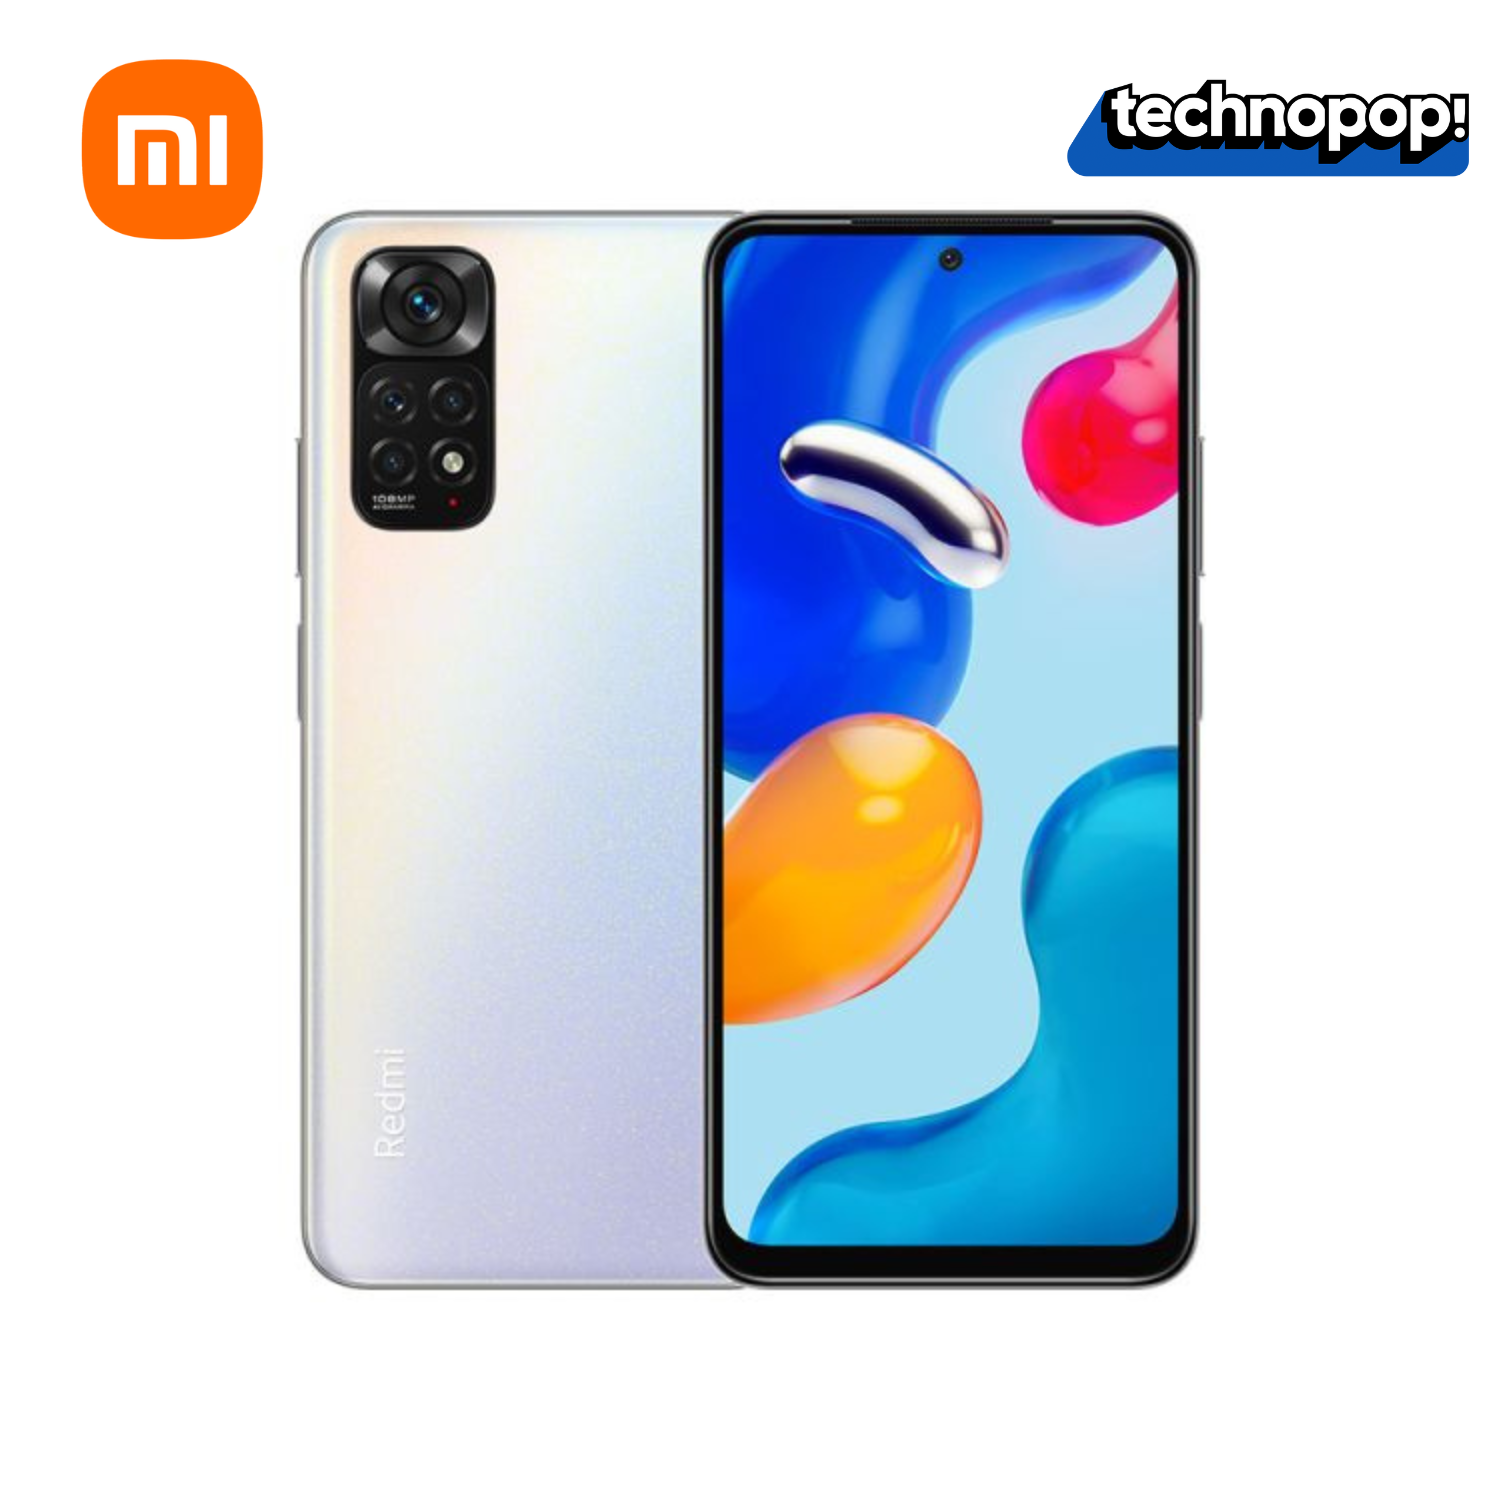 Xiaomi Redmi Note 11 Pro 2201116TI Star Blue 128GB 6GB RAM Gsm Unlocked  Phone Mediatek Helio G96 108MP The phone comes with a 120 Hz refresh rate  6.67-inch touchscreen display offering a